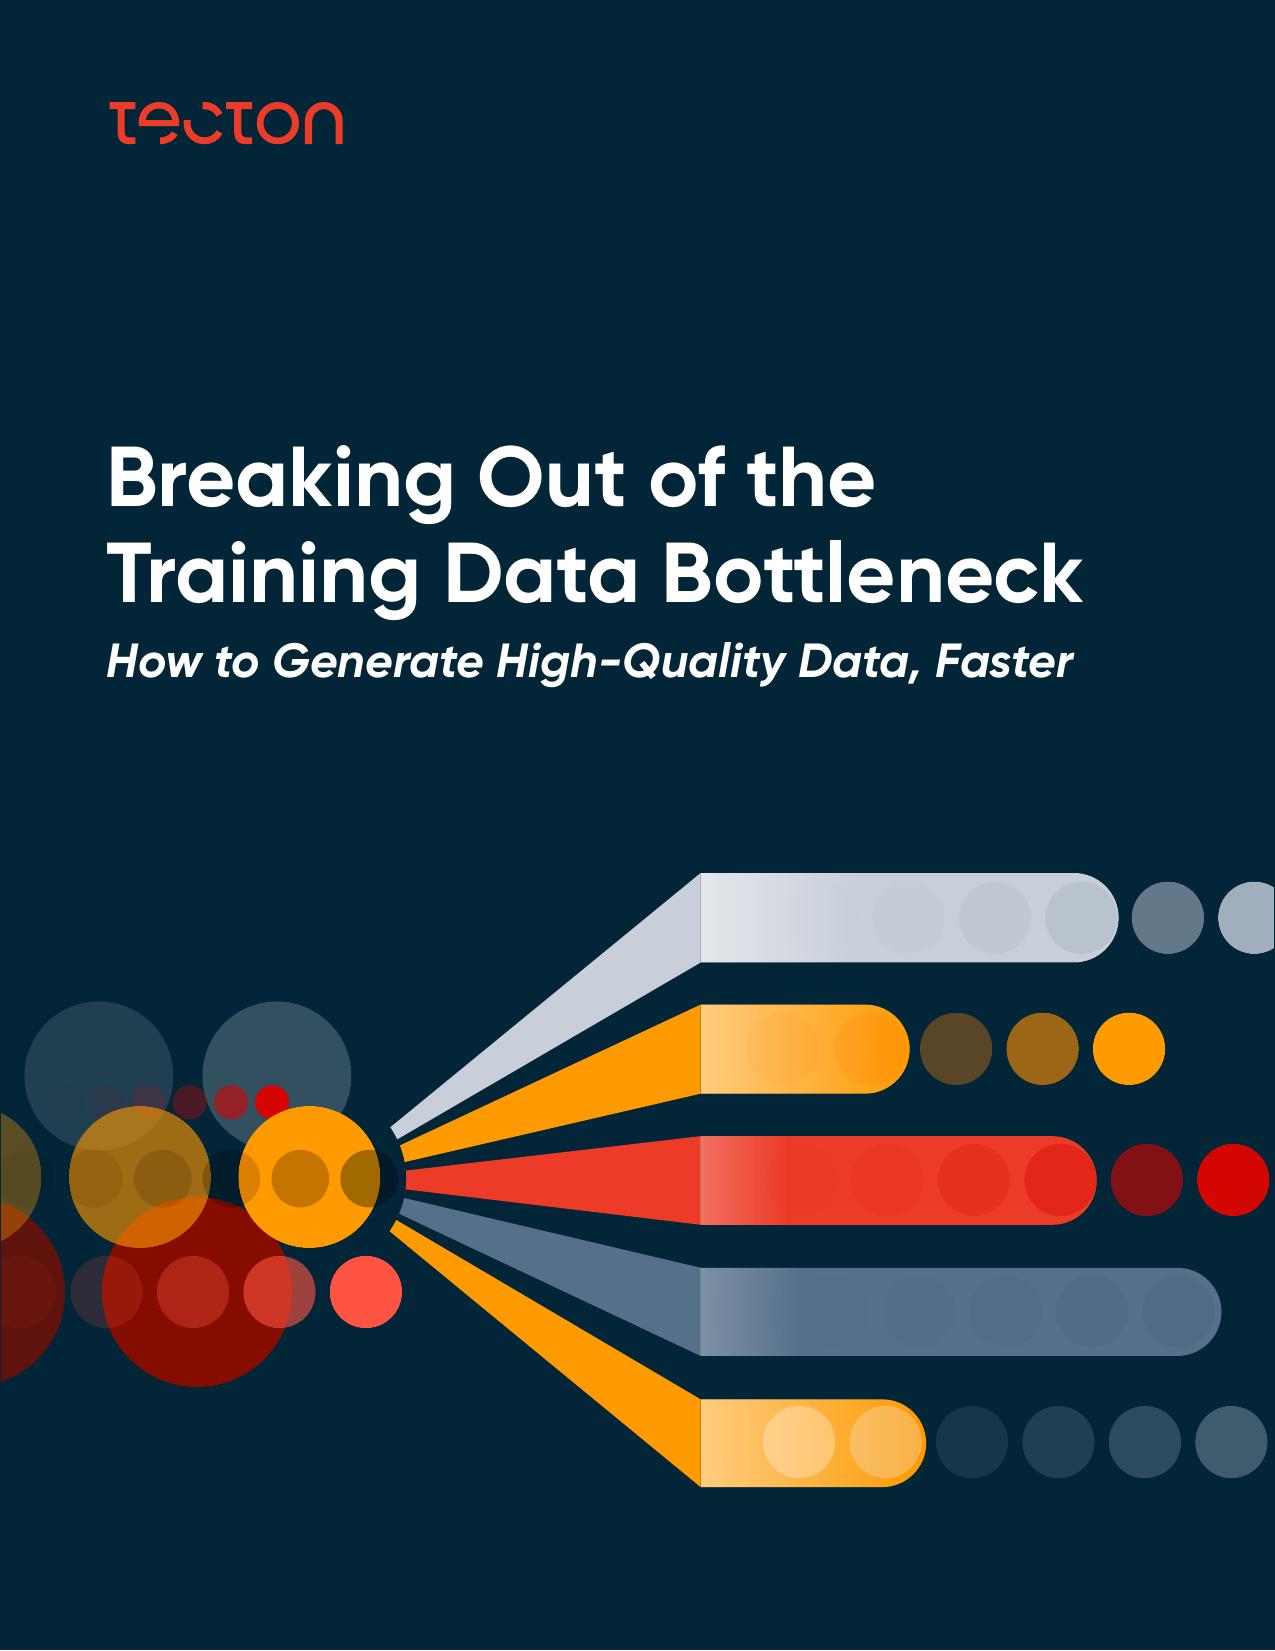 Breaking Out of the Training Data Bottleneck - How to Generate High-Quality Data, Faster